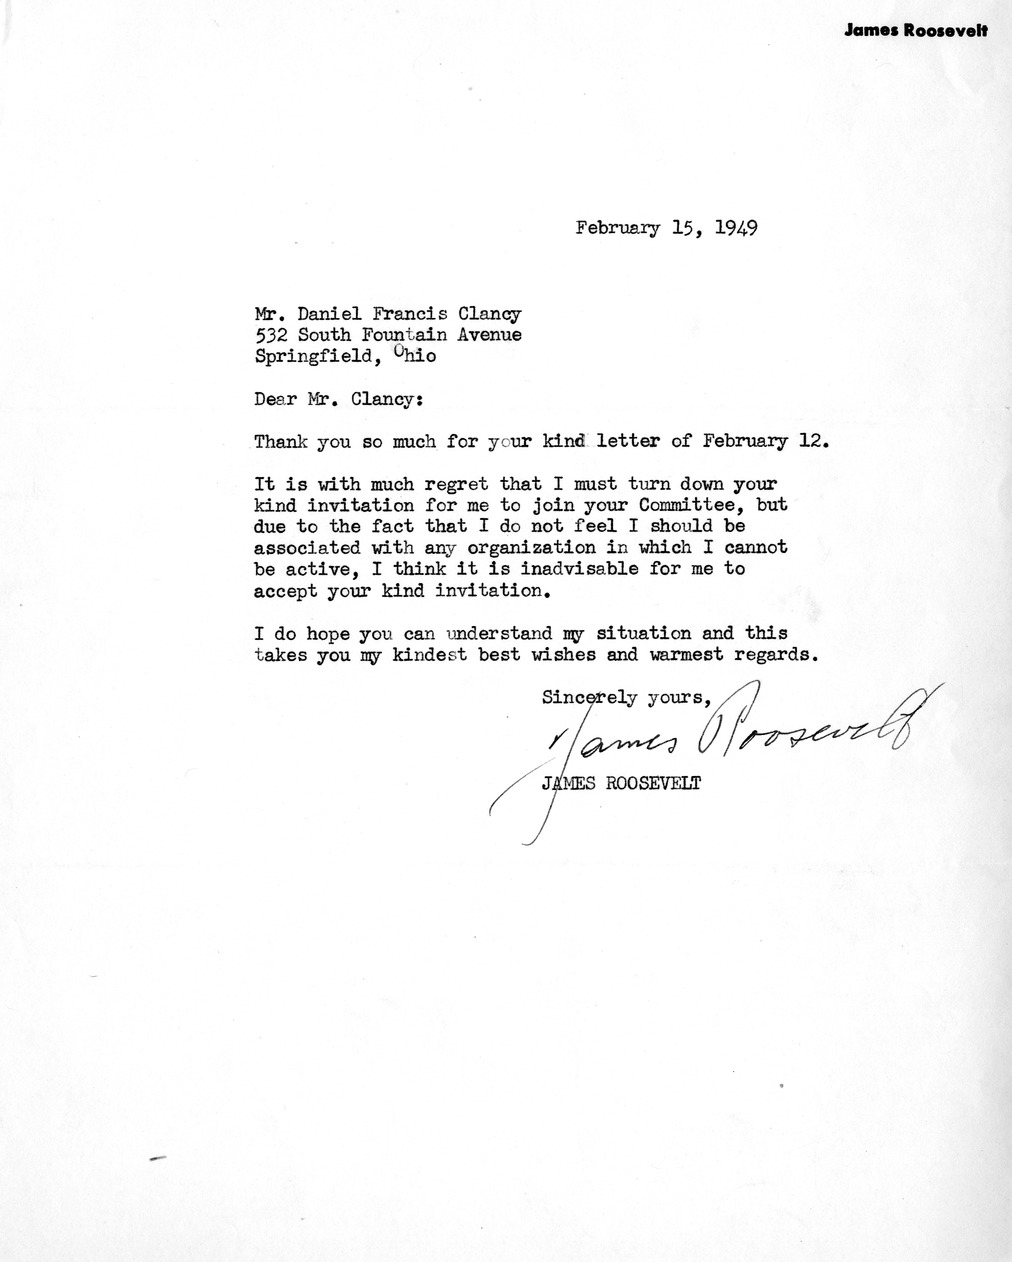 Letter from James Roosevelt to Daniel F. Clancy